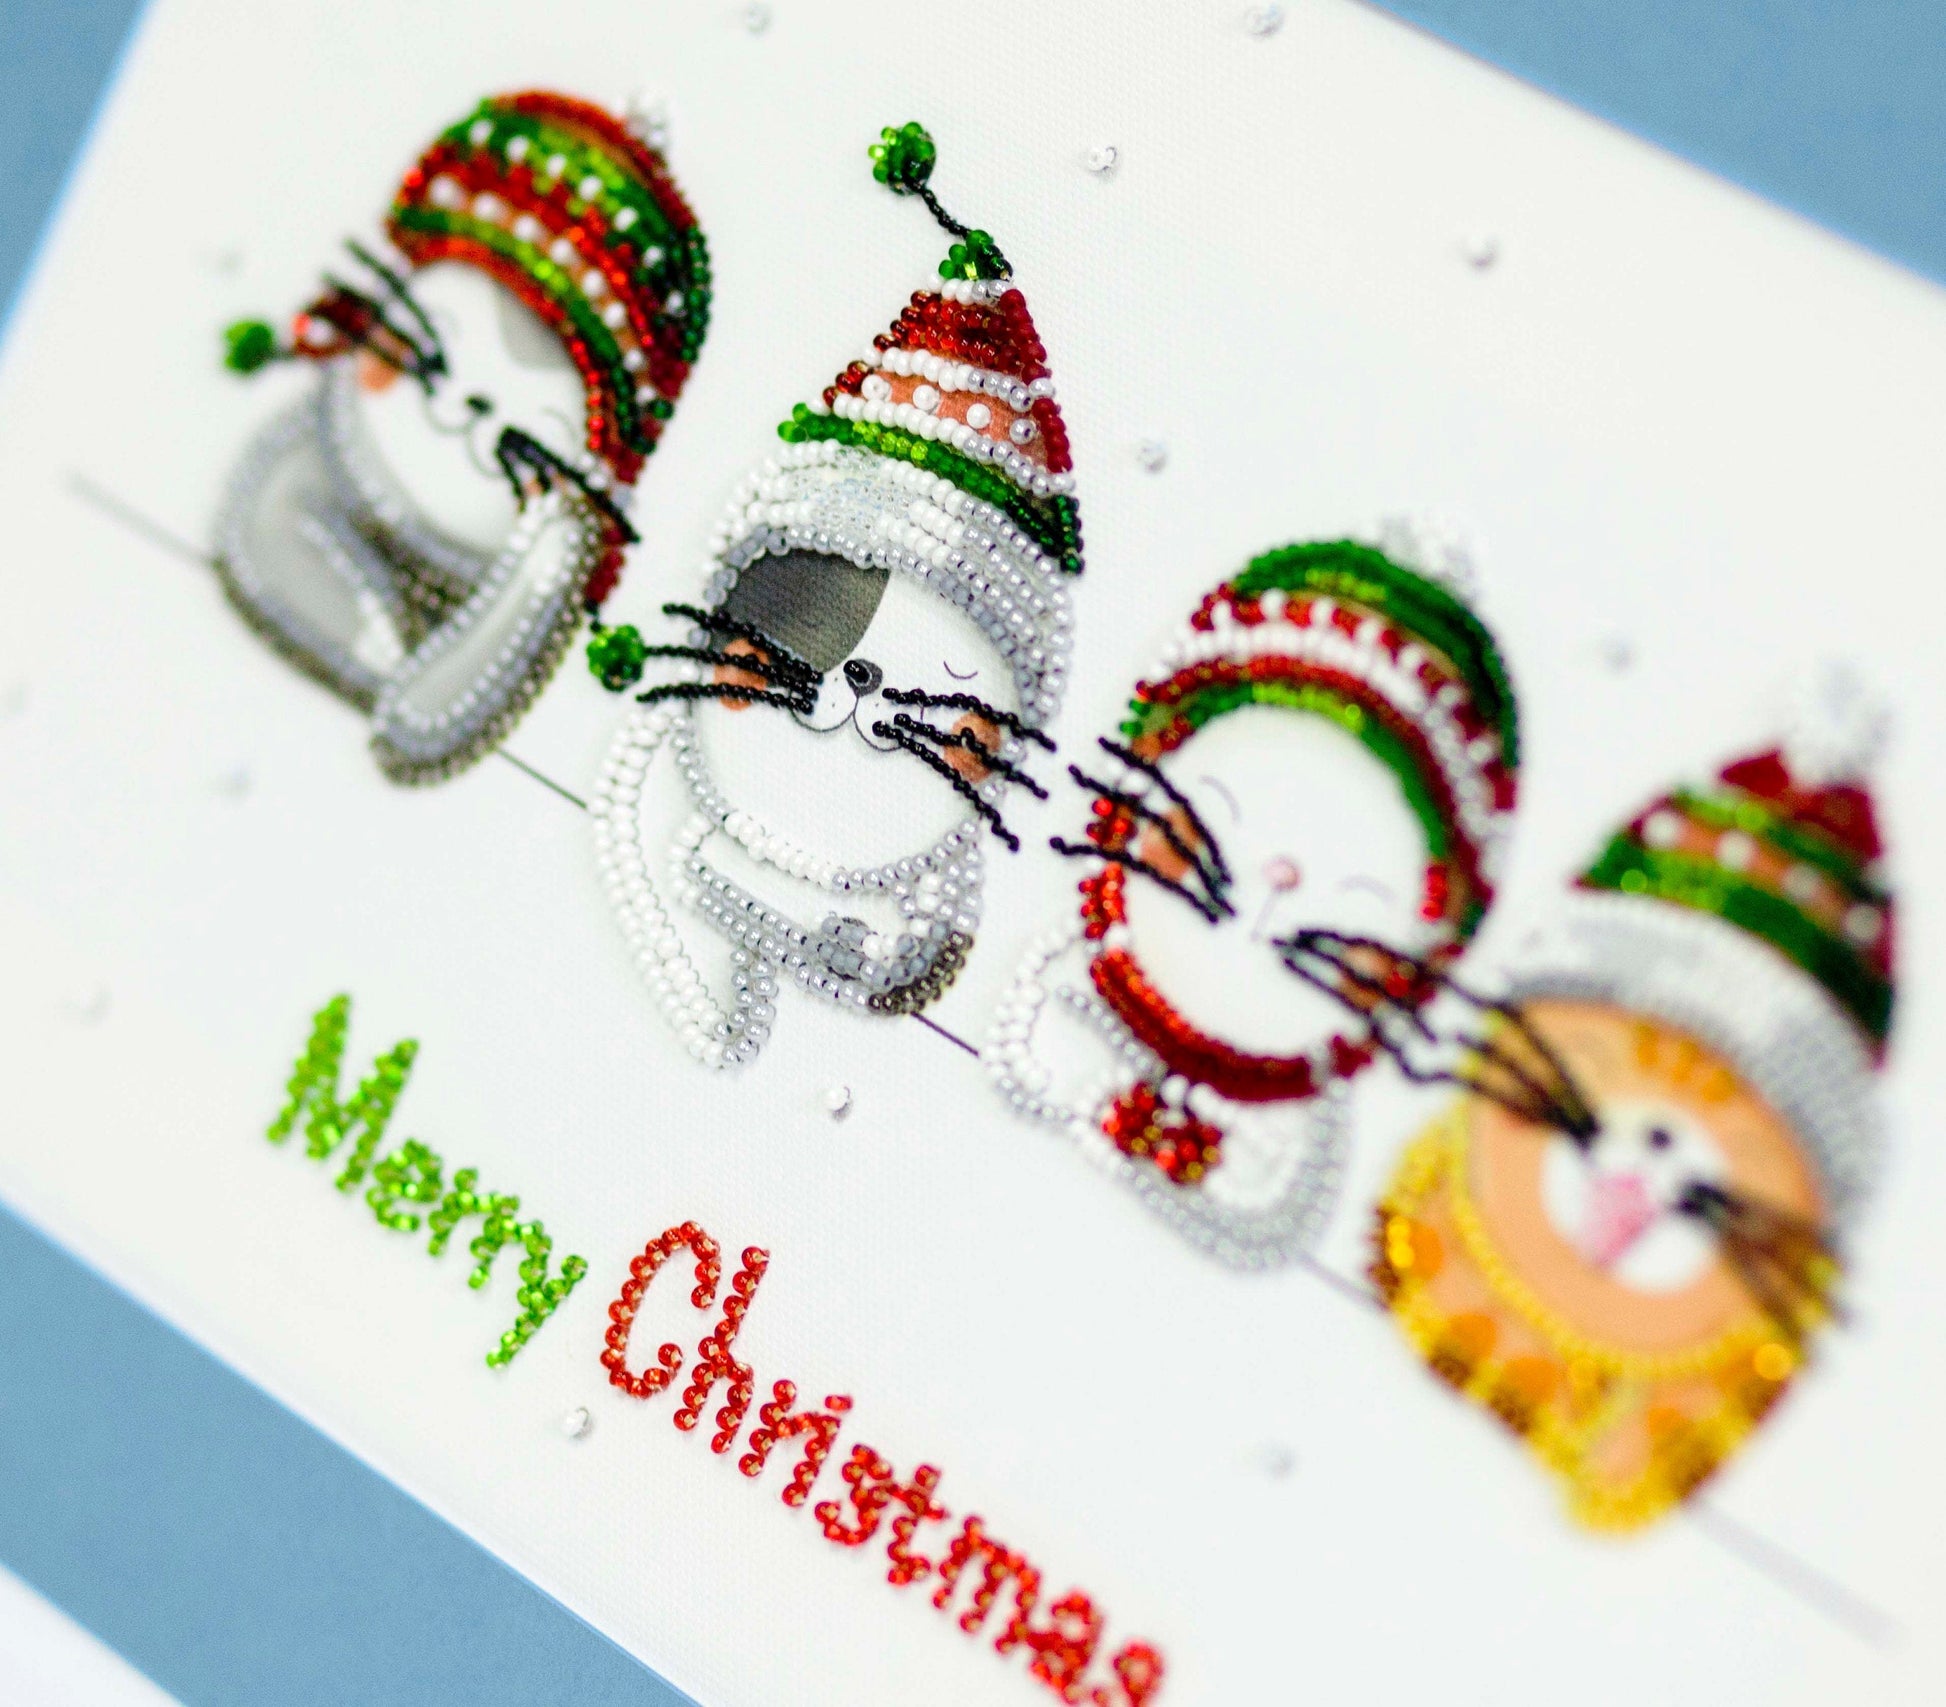 Bead embroidery kit Merry Christmas Size: 6.7"×11.8" (17×30 cm)